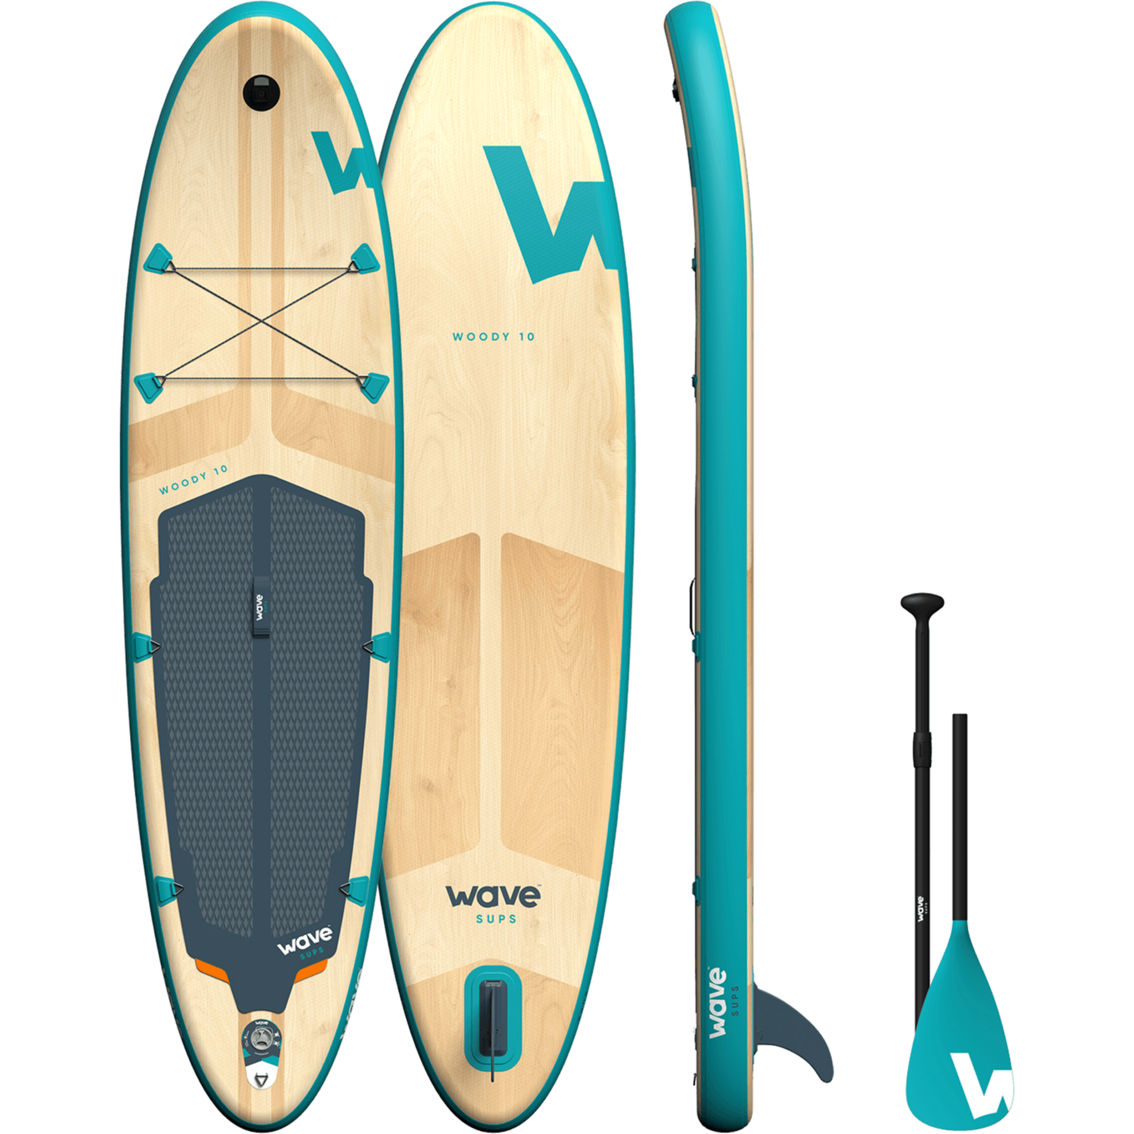 WAVE Direct 10 ft. Wave Woody Sup Package - Image 2 of 5